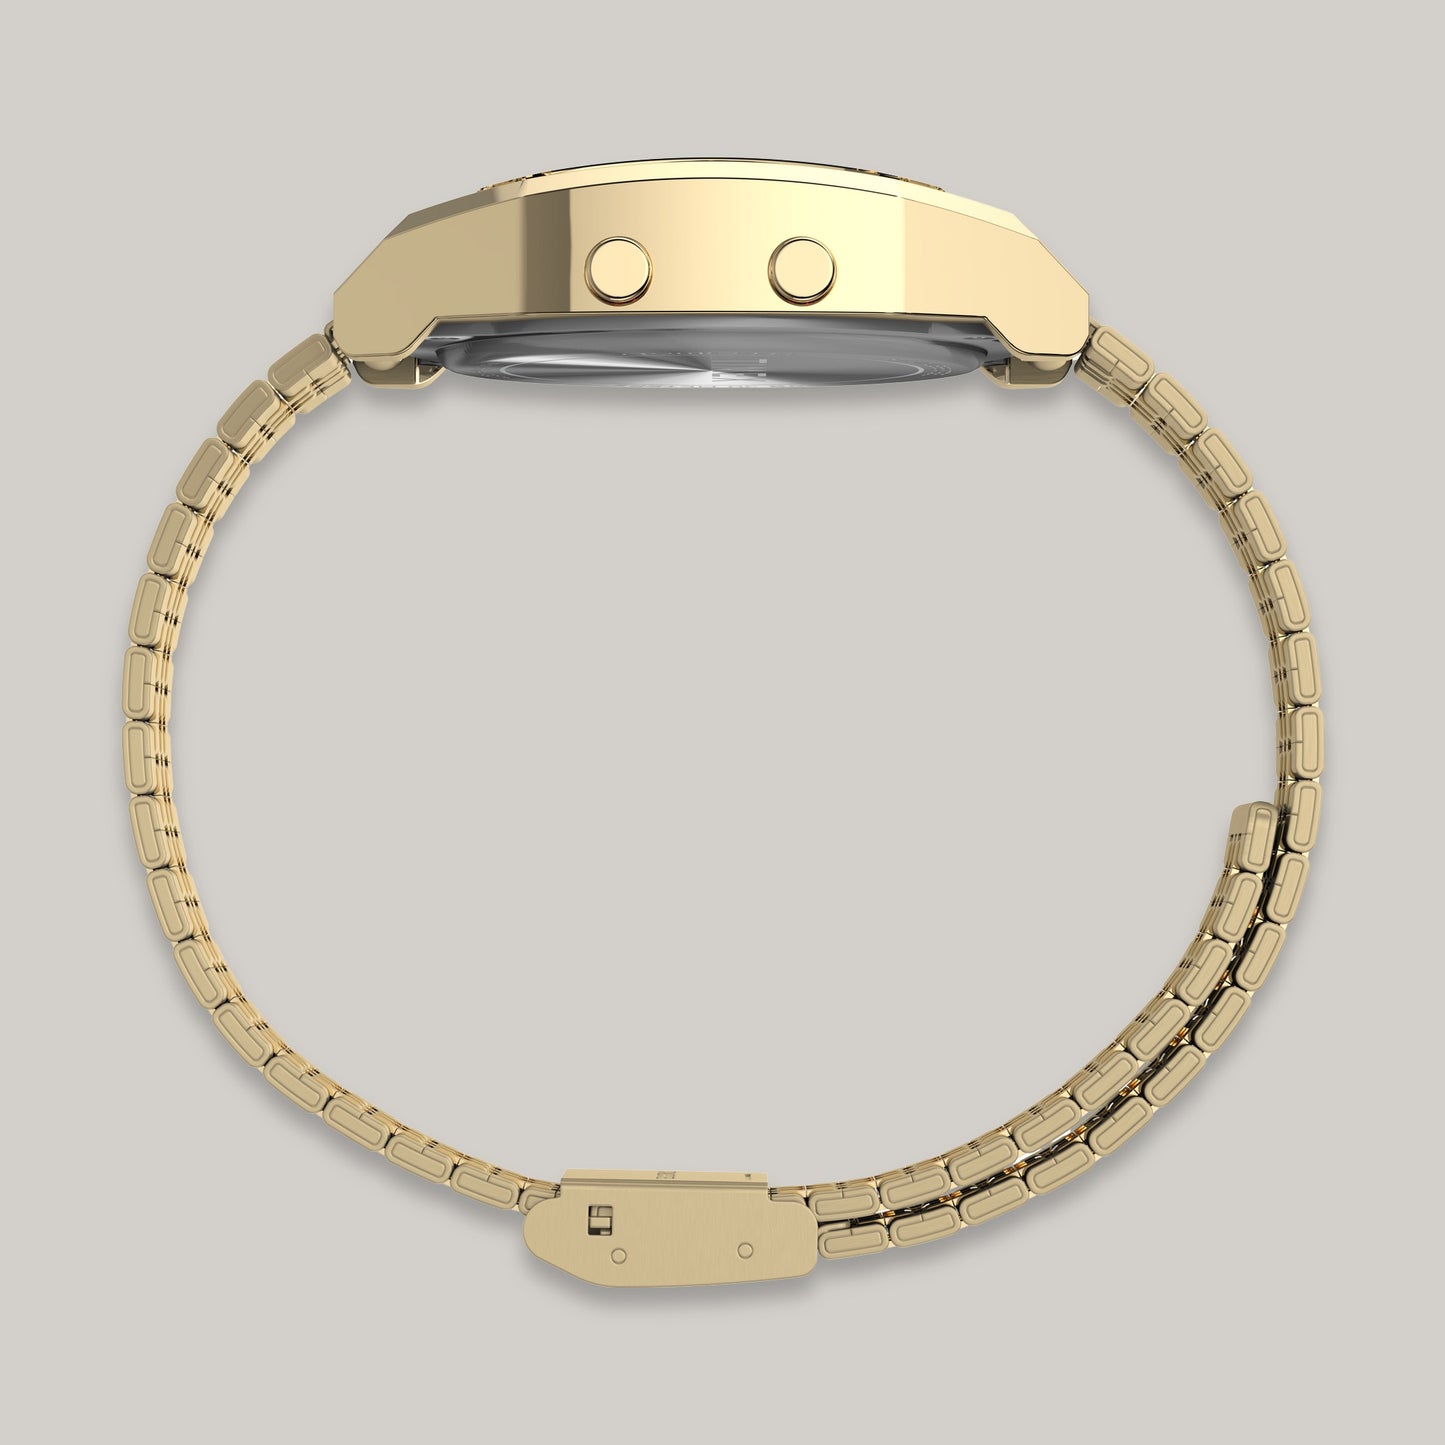 TIMEX T80 36MM STAINLESS STEEL BRACELET - GOLD TONE